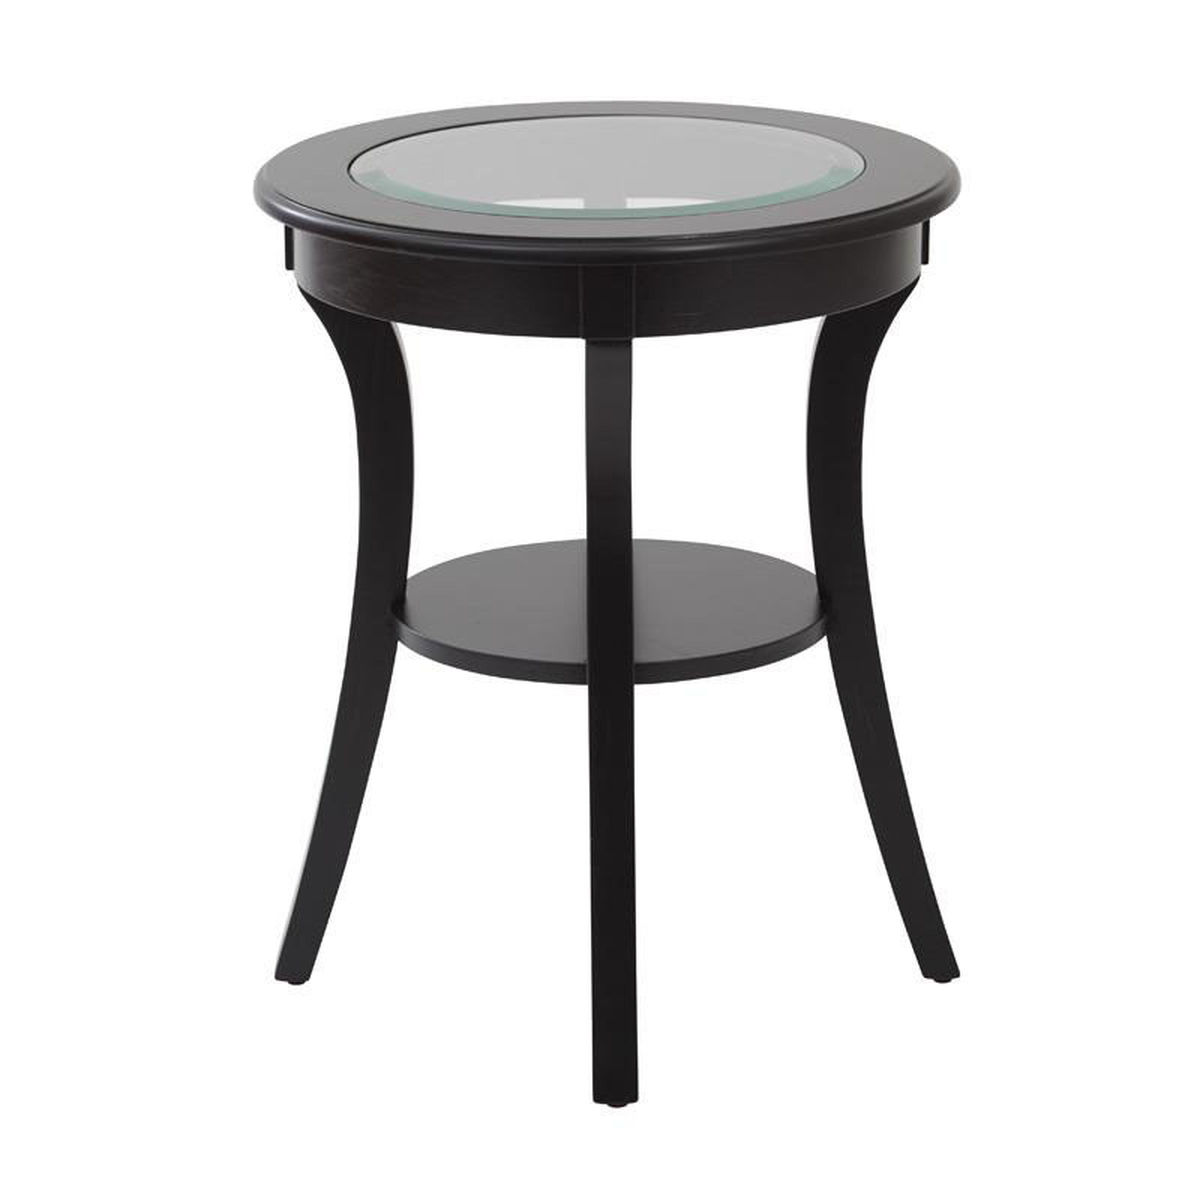 harper black glass accent table bizchair office star products round top our osp designs with wood finish and shelf square drop leaf spencer furniture west elm floor pillow cute